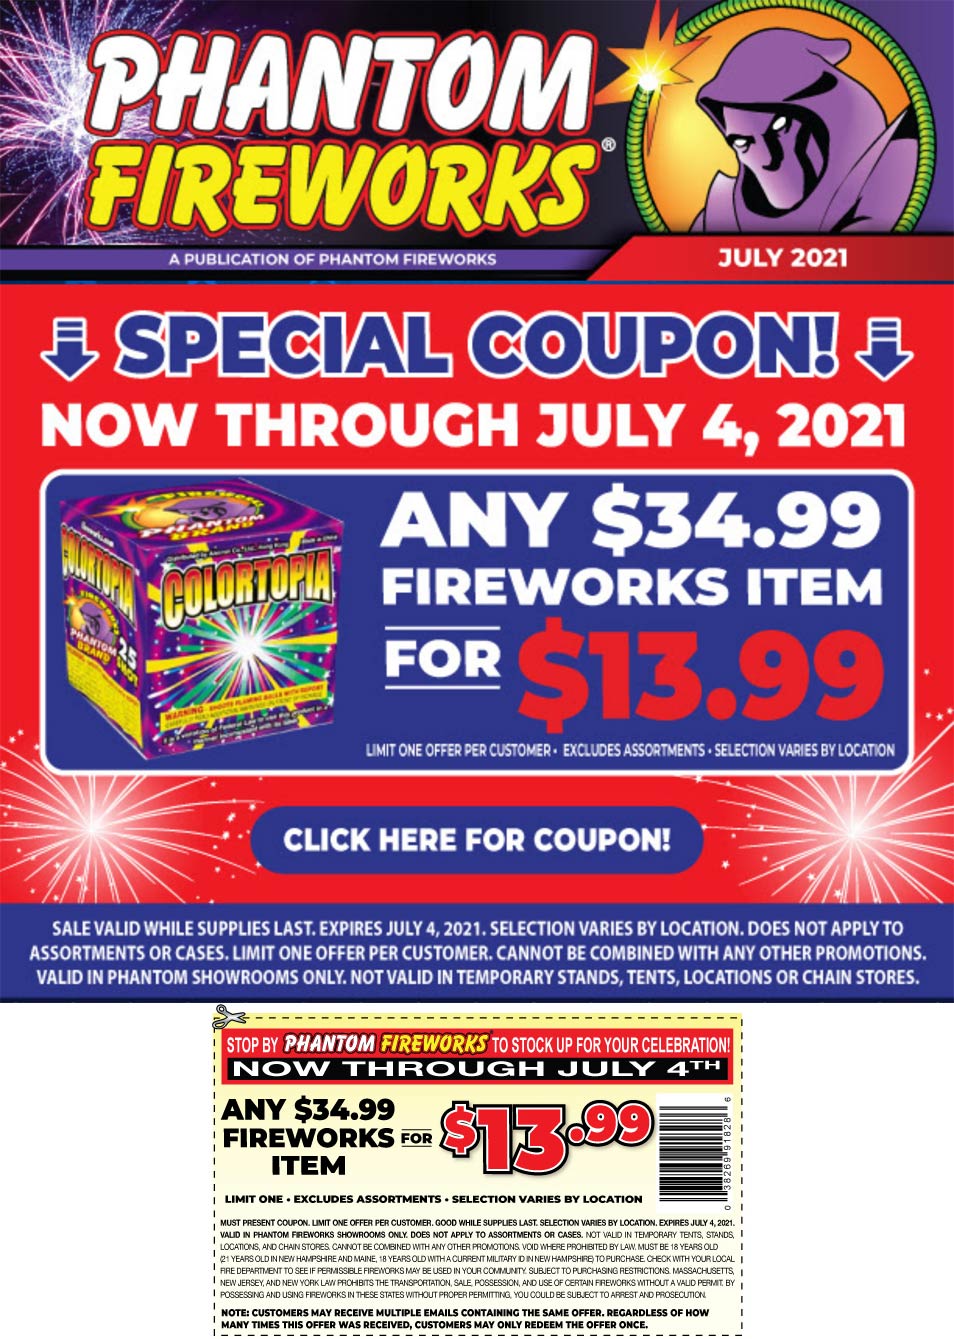 Phantom Fireworks stores Coupon  Any $35 item for $14 at Phantom Fireworks #phantomfireworks 